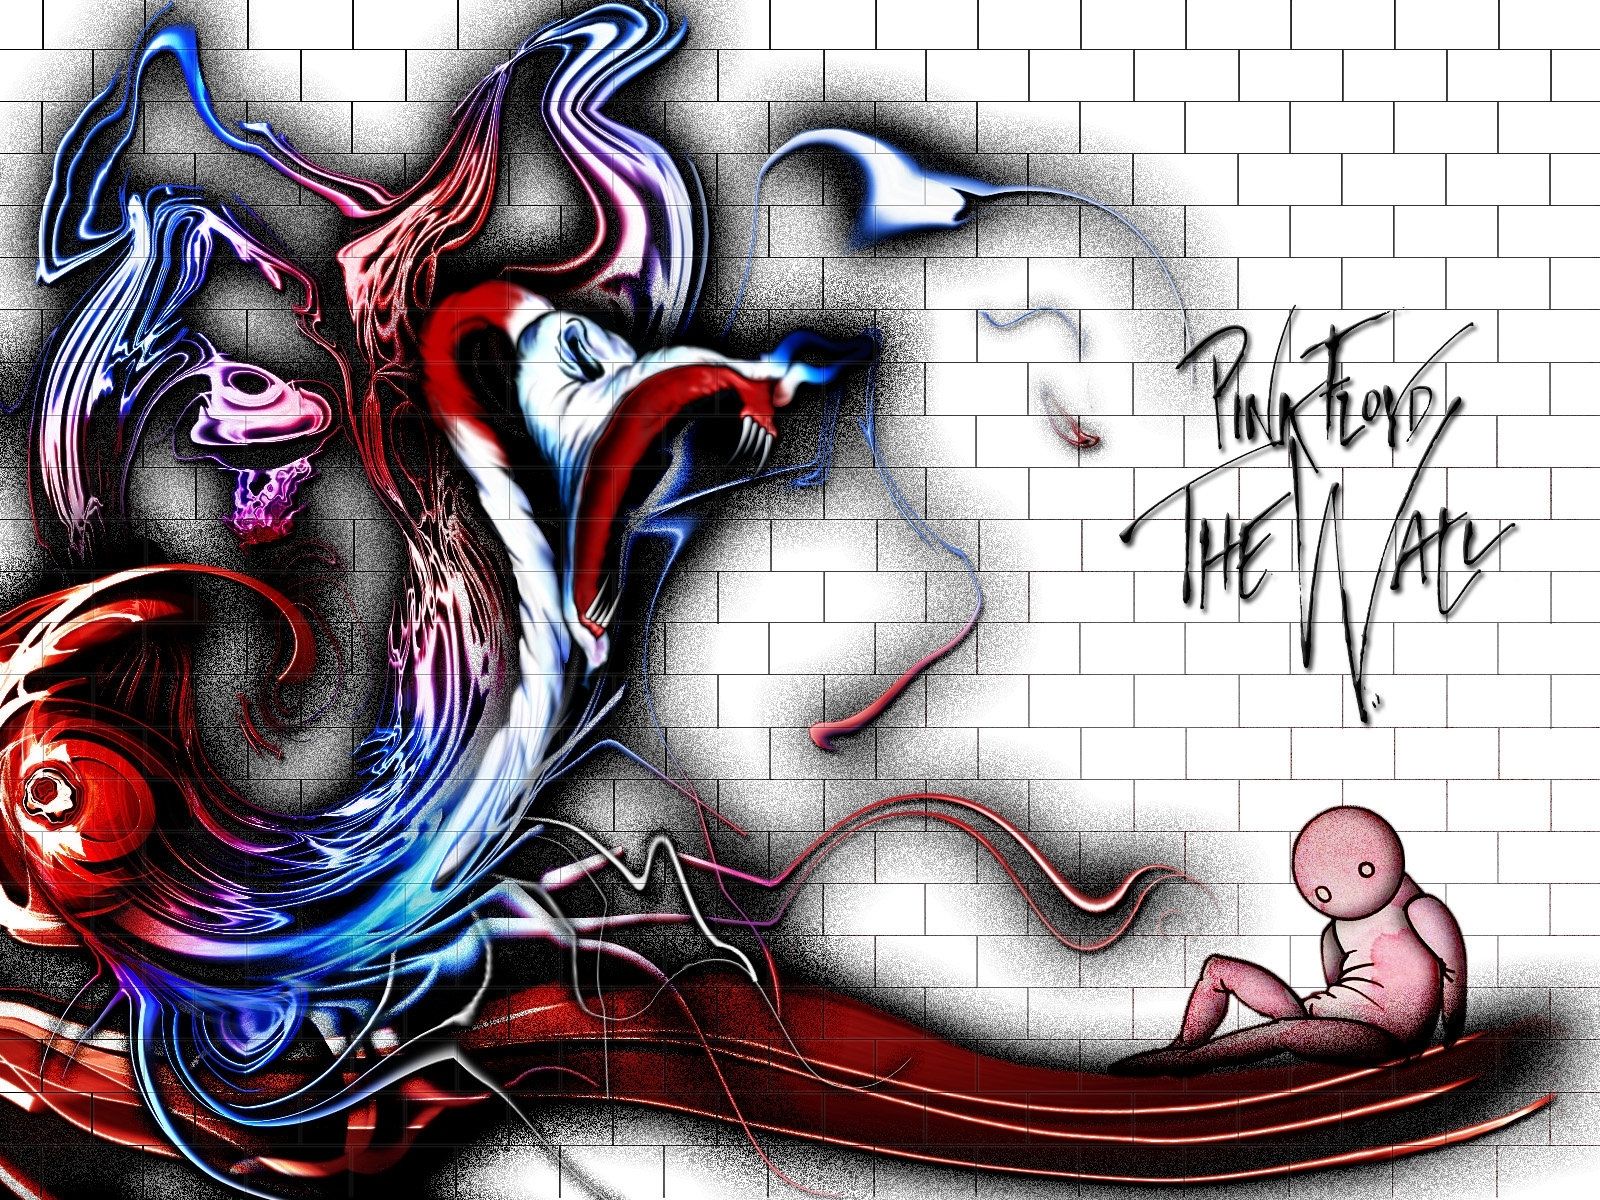 Pink' Floyd – The Wallemrat On Deviantart For Pink Floyd The Wall Art (View 4 of 20)